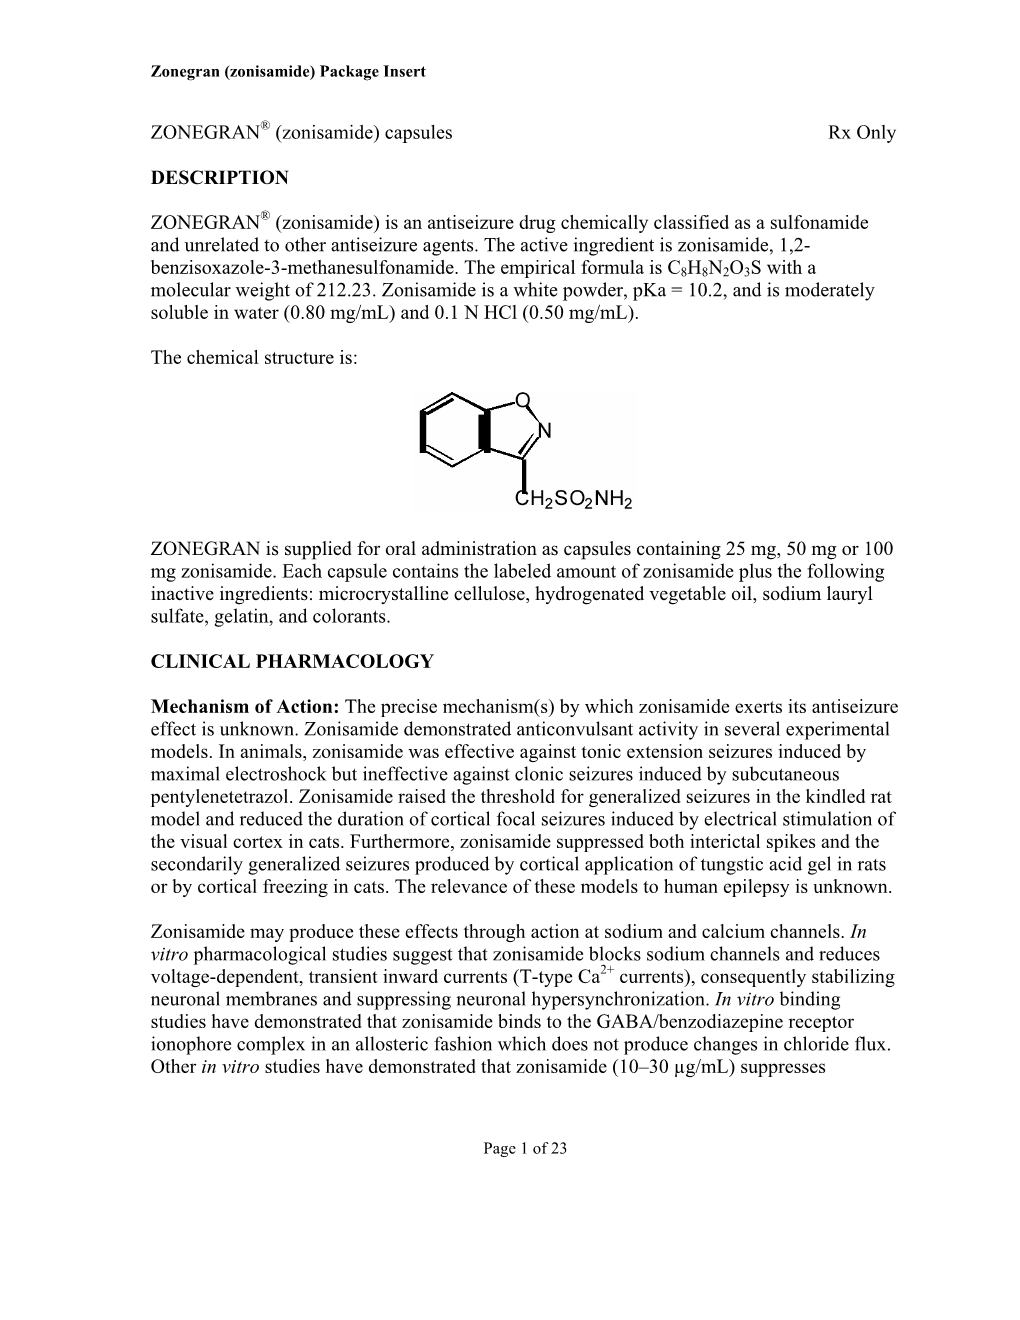 Zonegran (Zonisamide) Package Insert Page 1 of 23